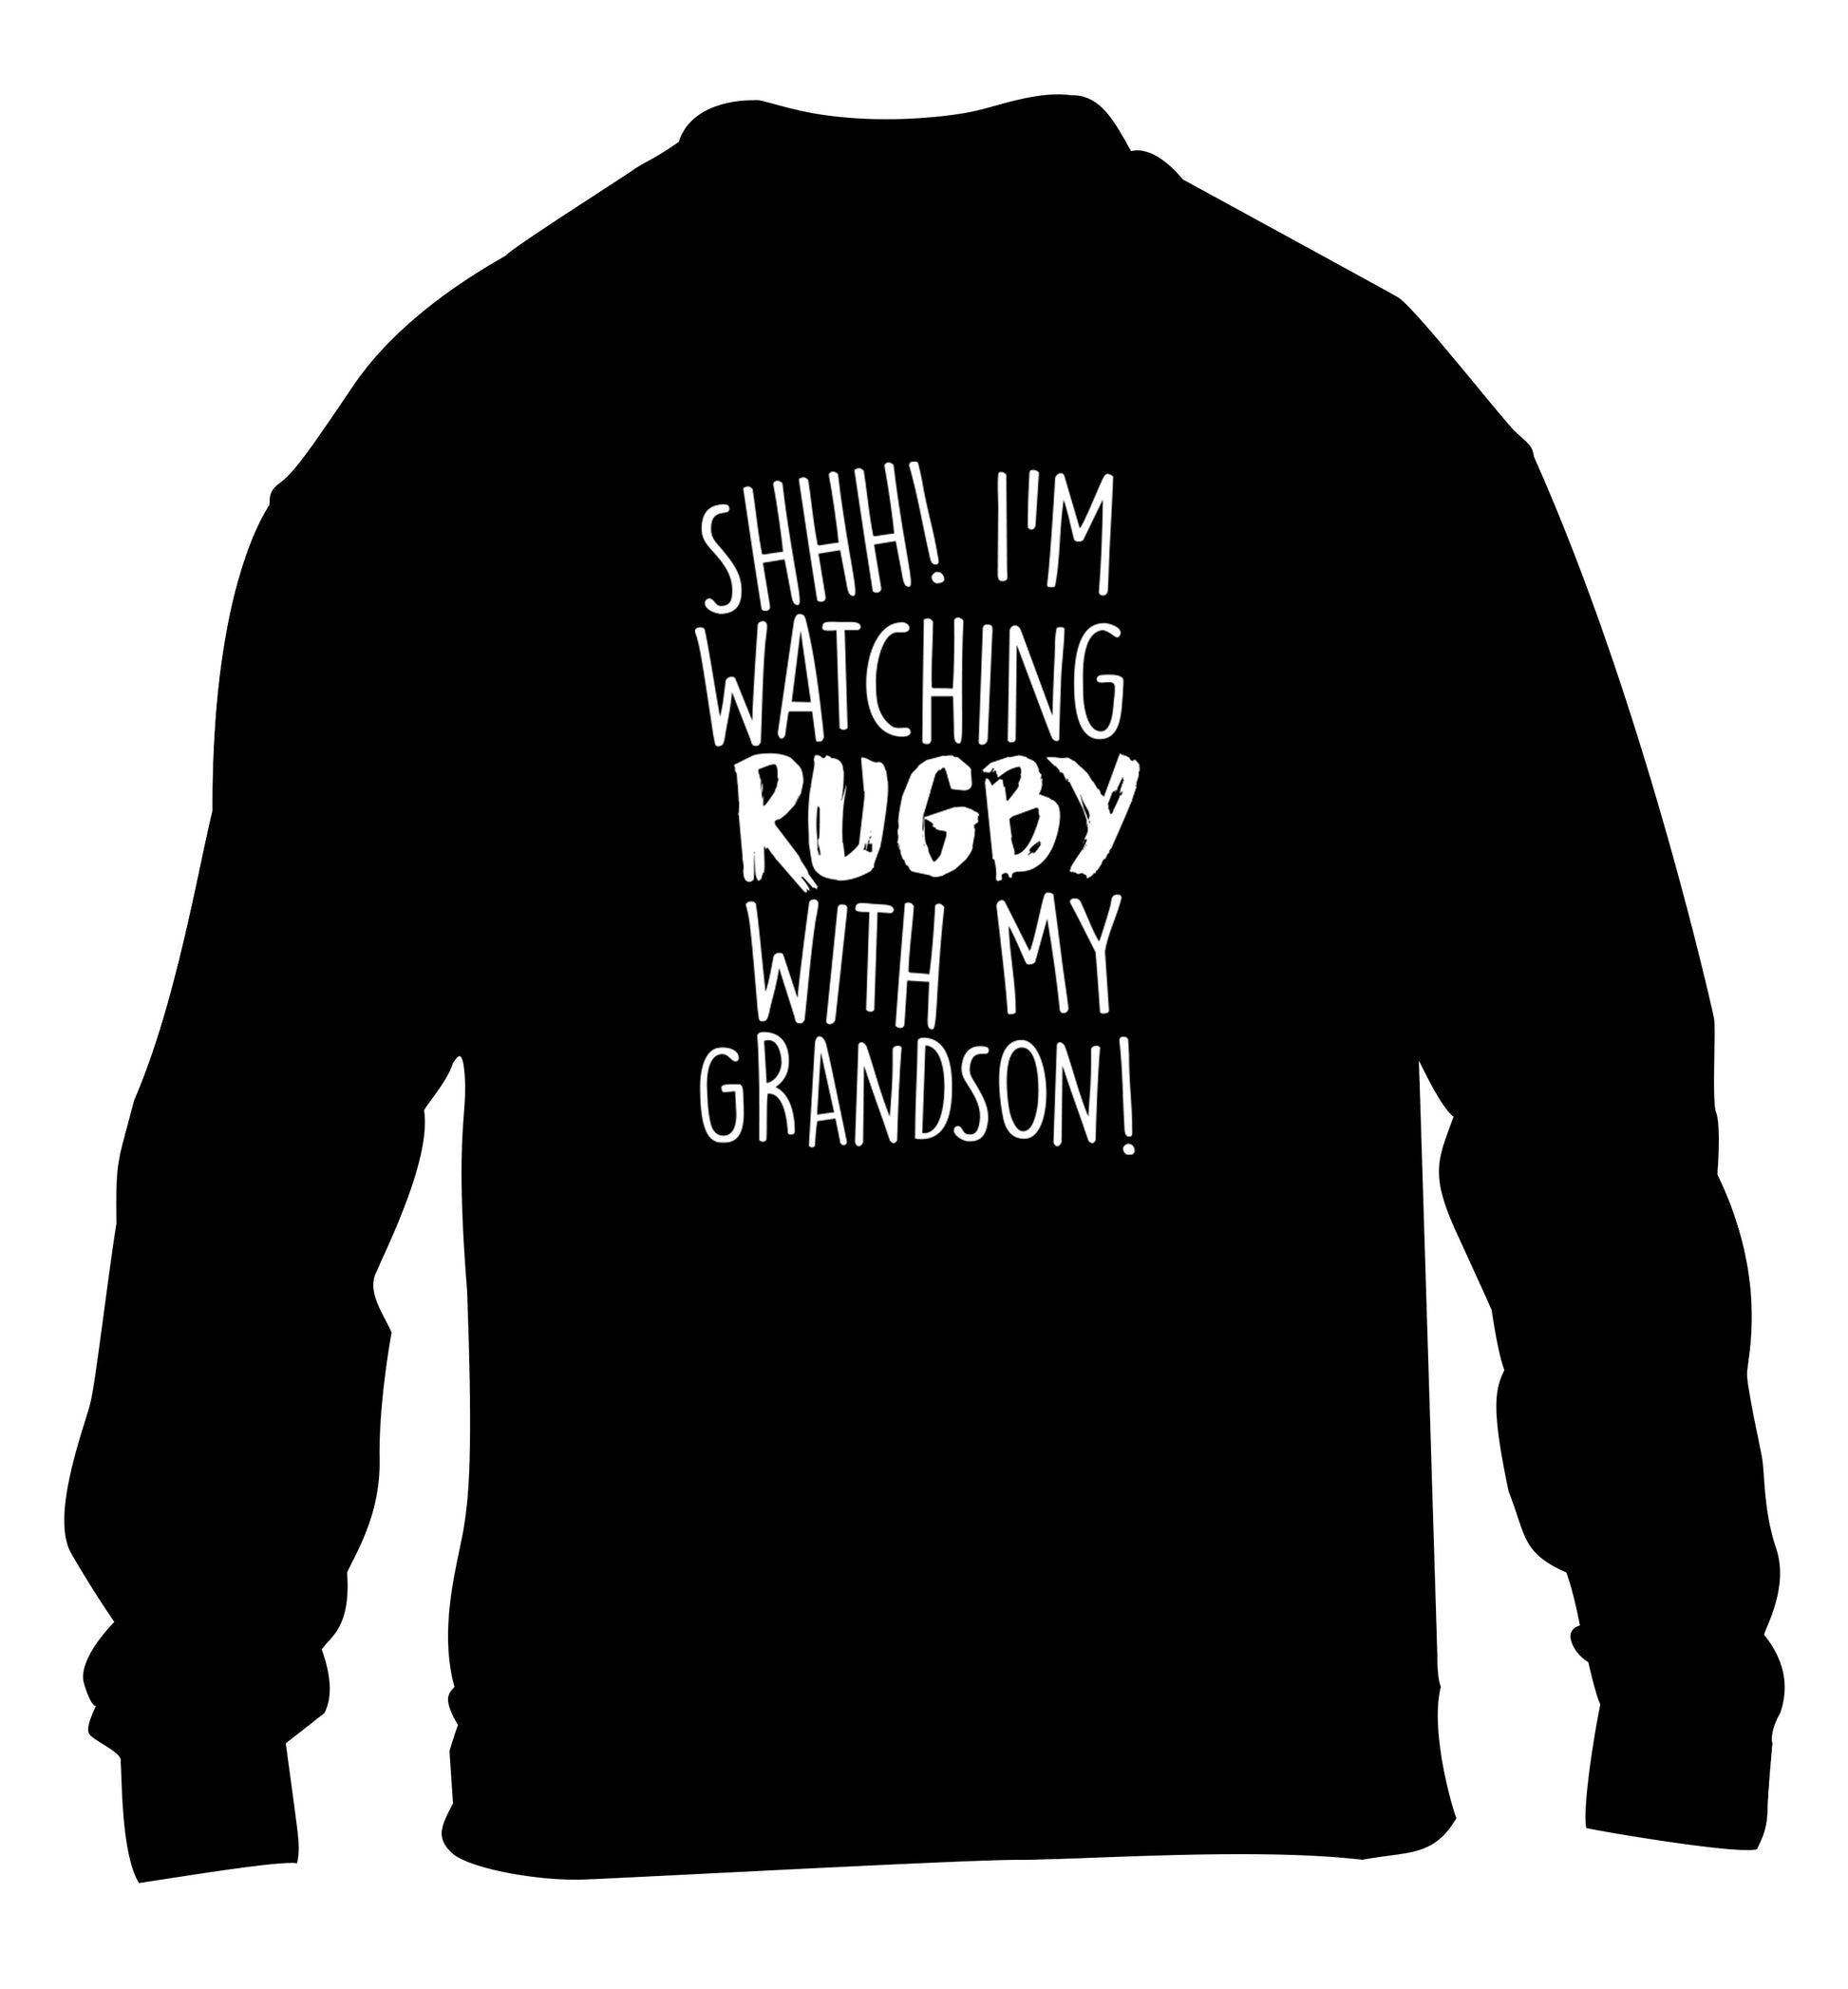 Shh I'm watching rugby with my grandson children's black sweater 12-13 Years